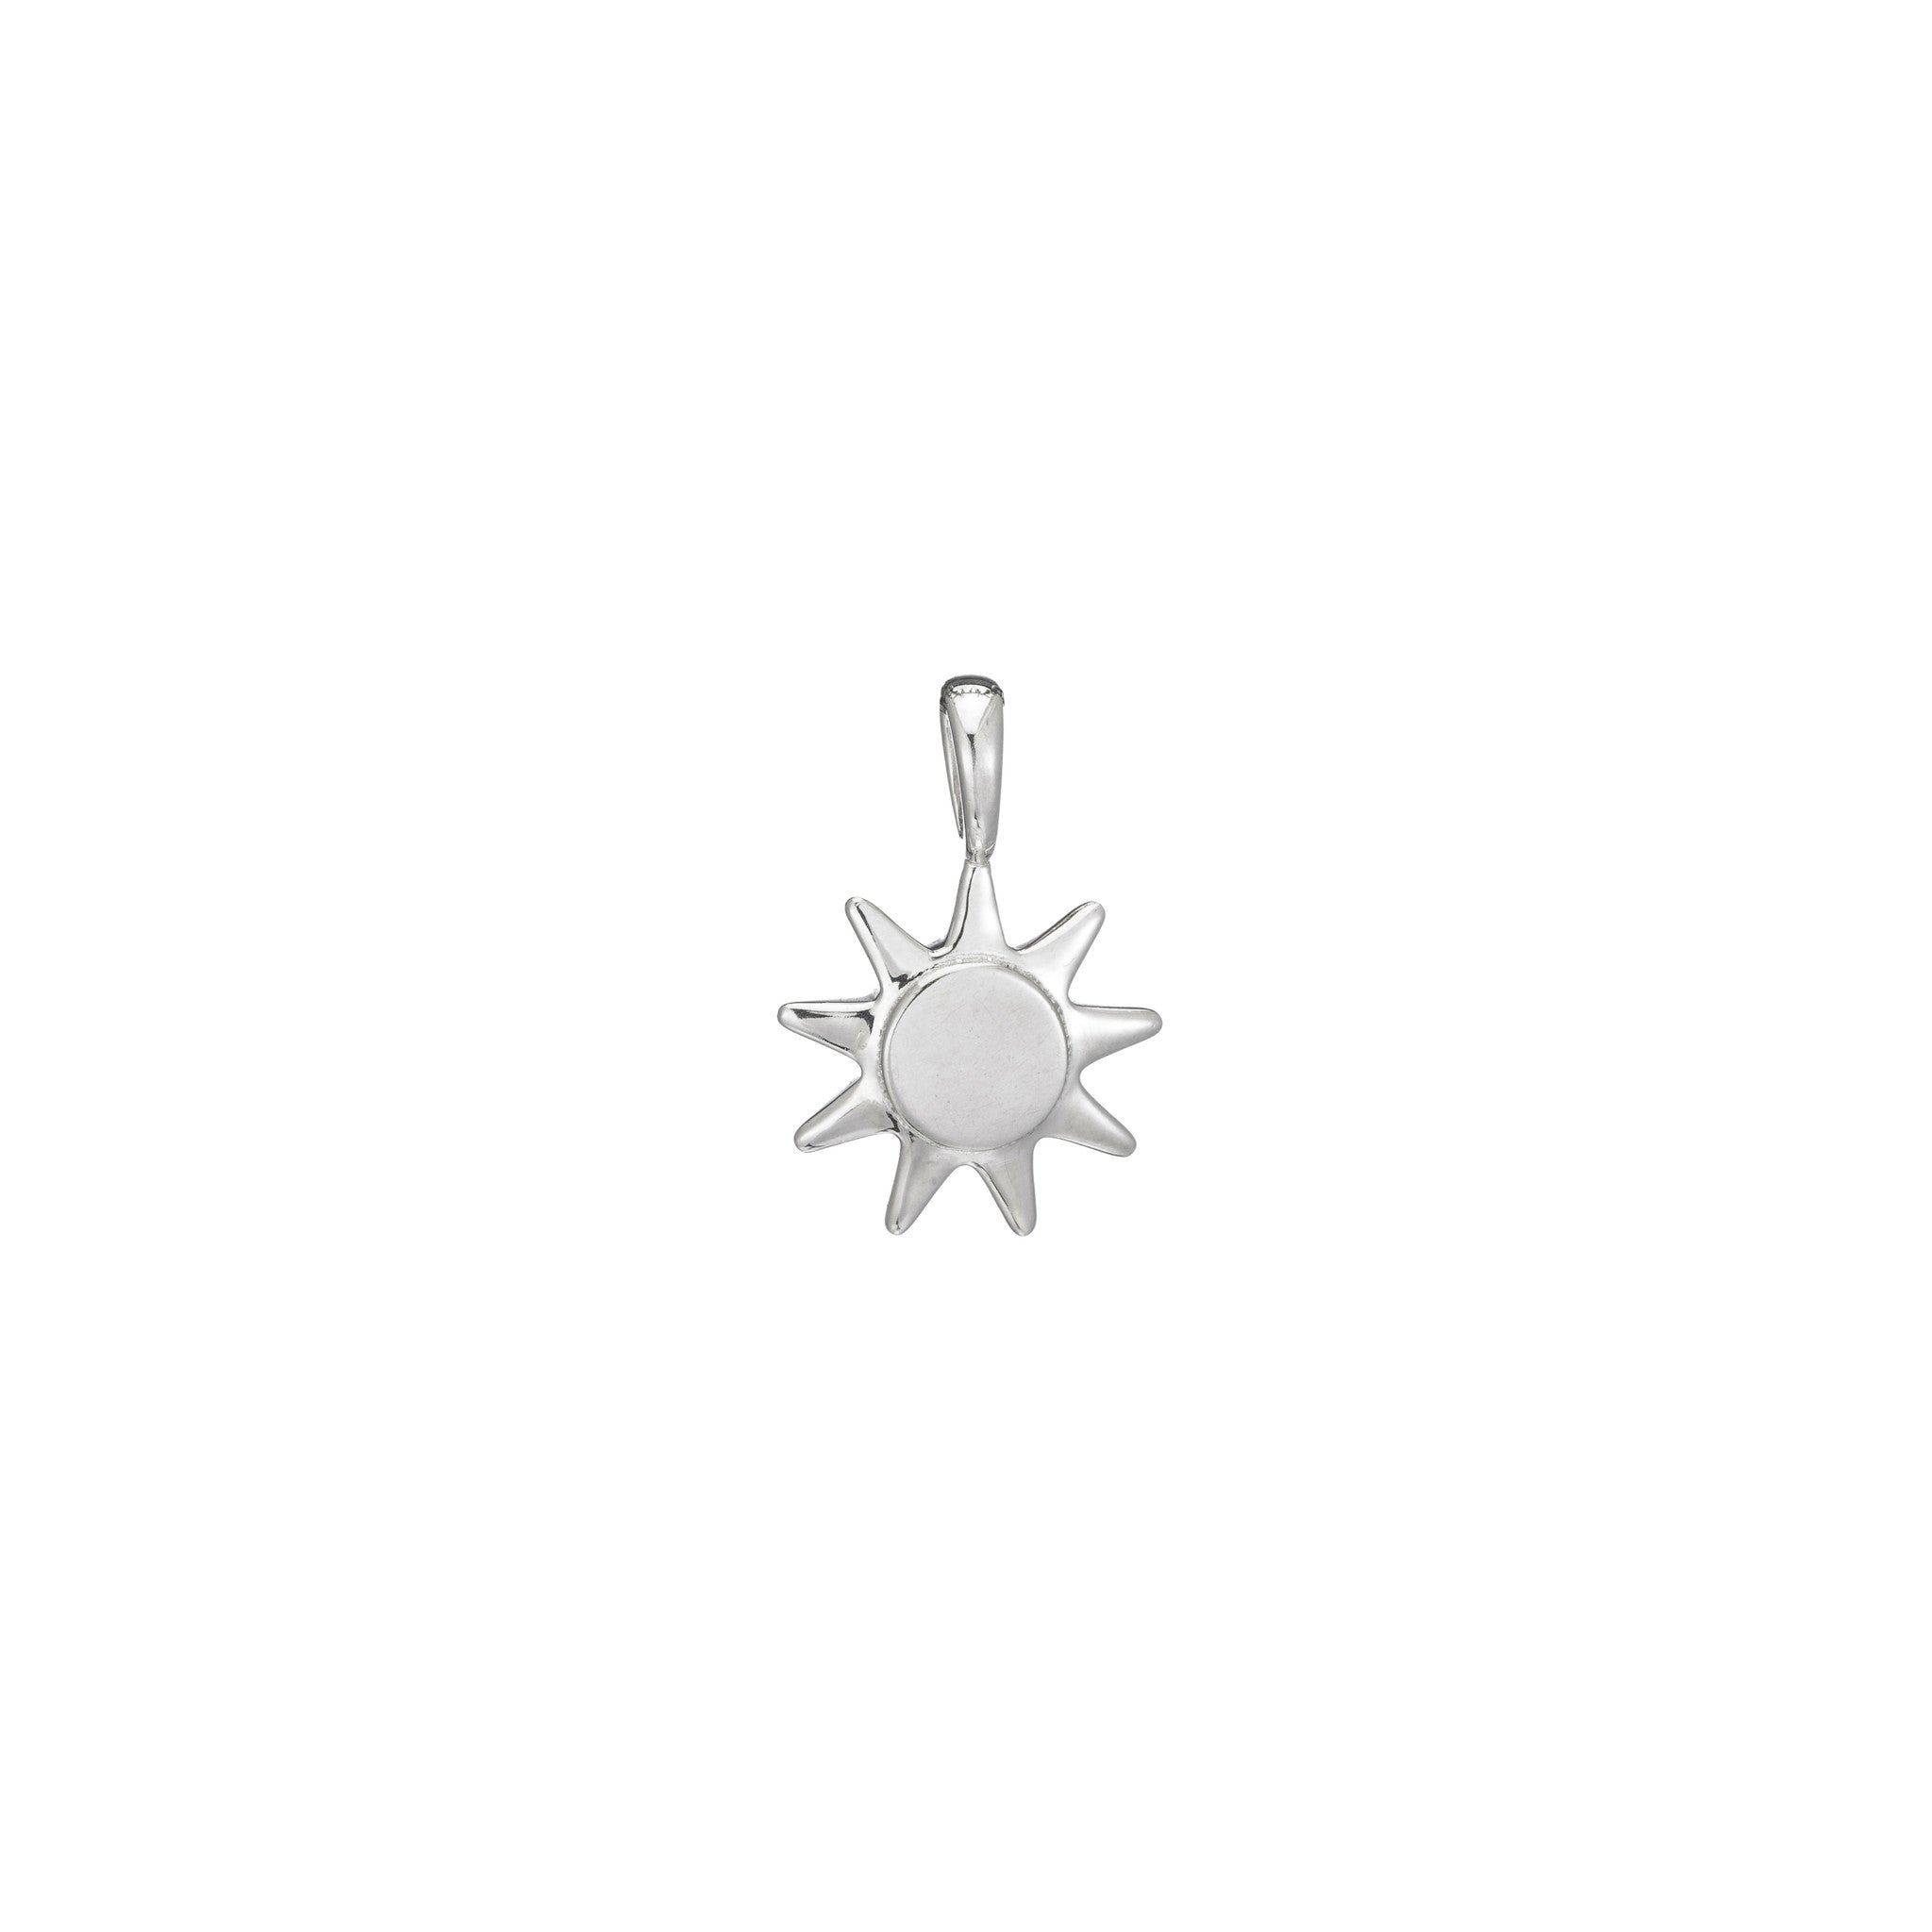 Tiny Sun Charm Polished Sterling Silver